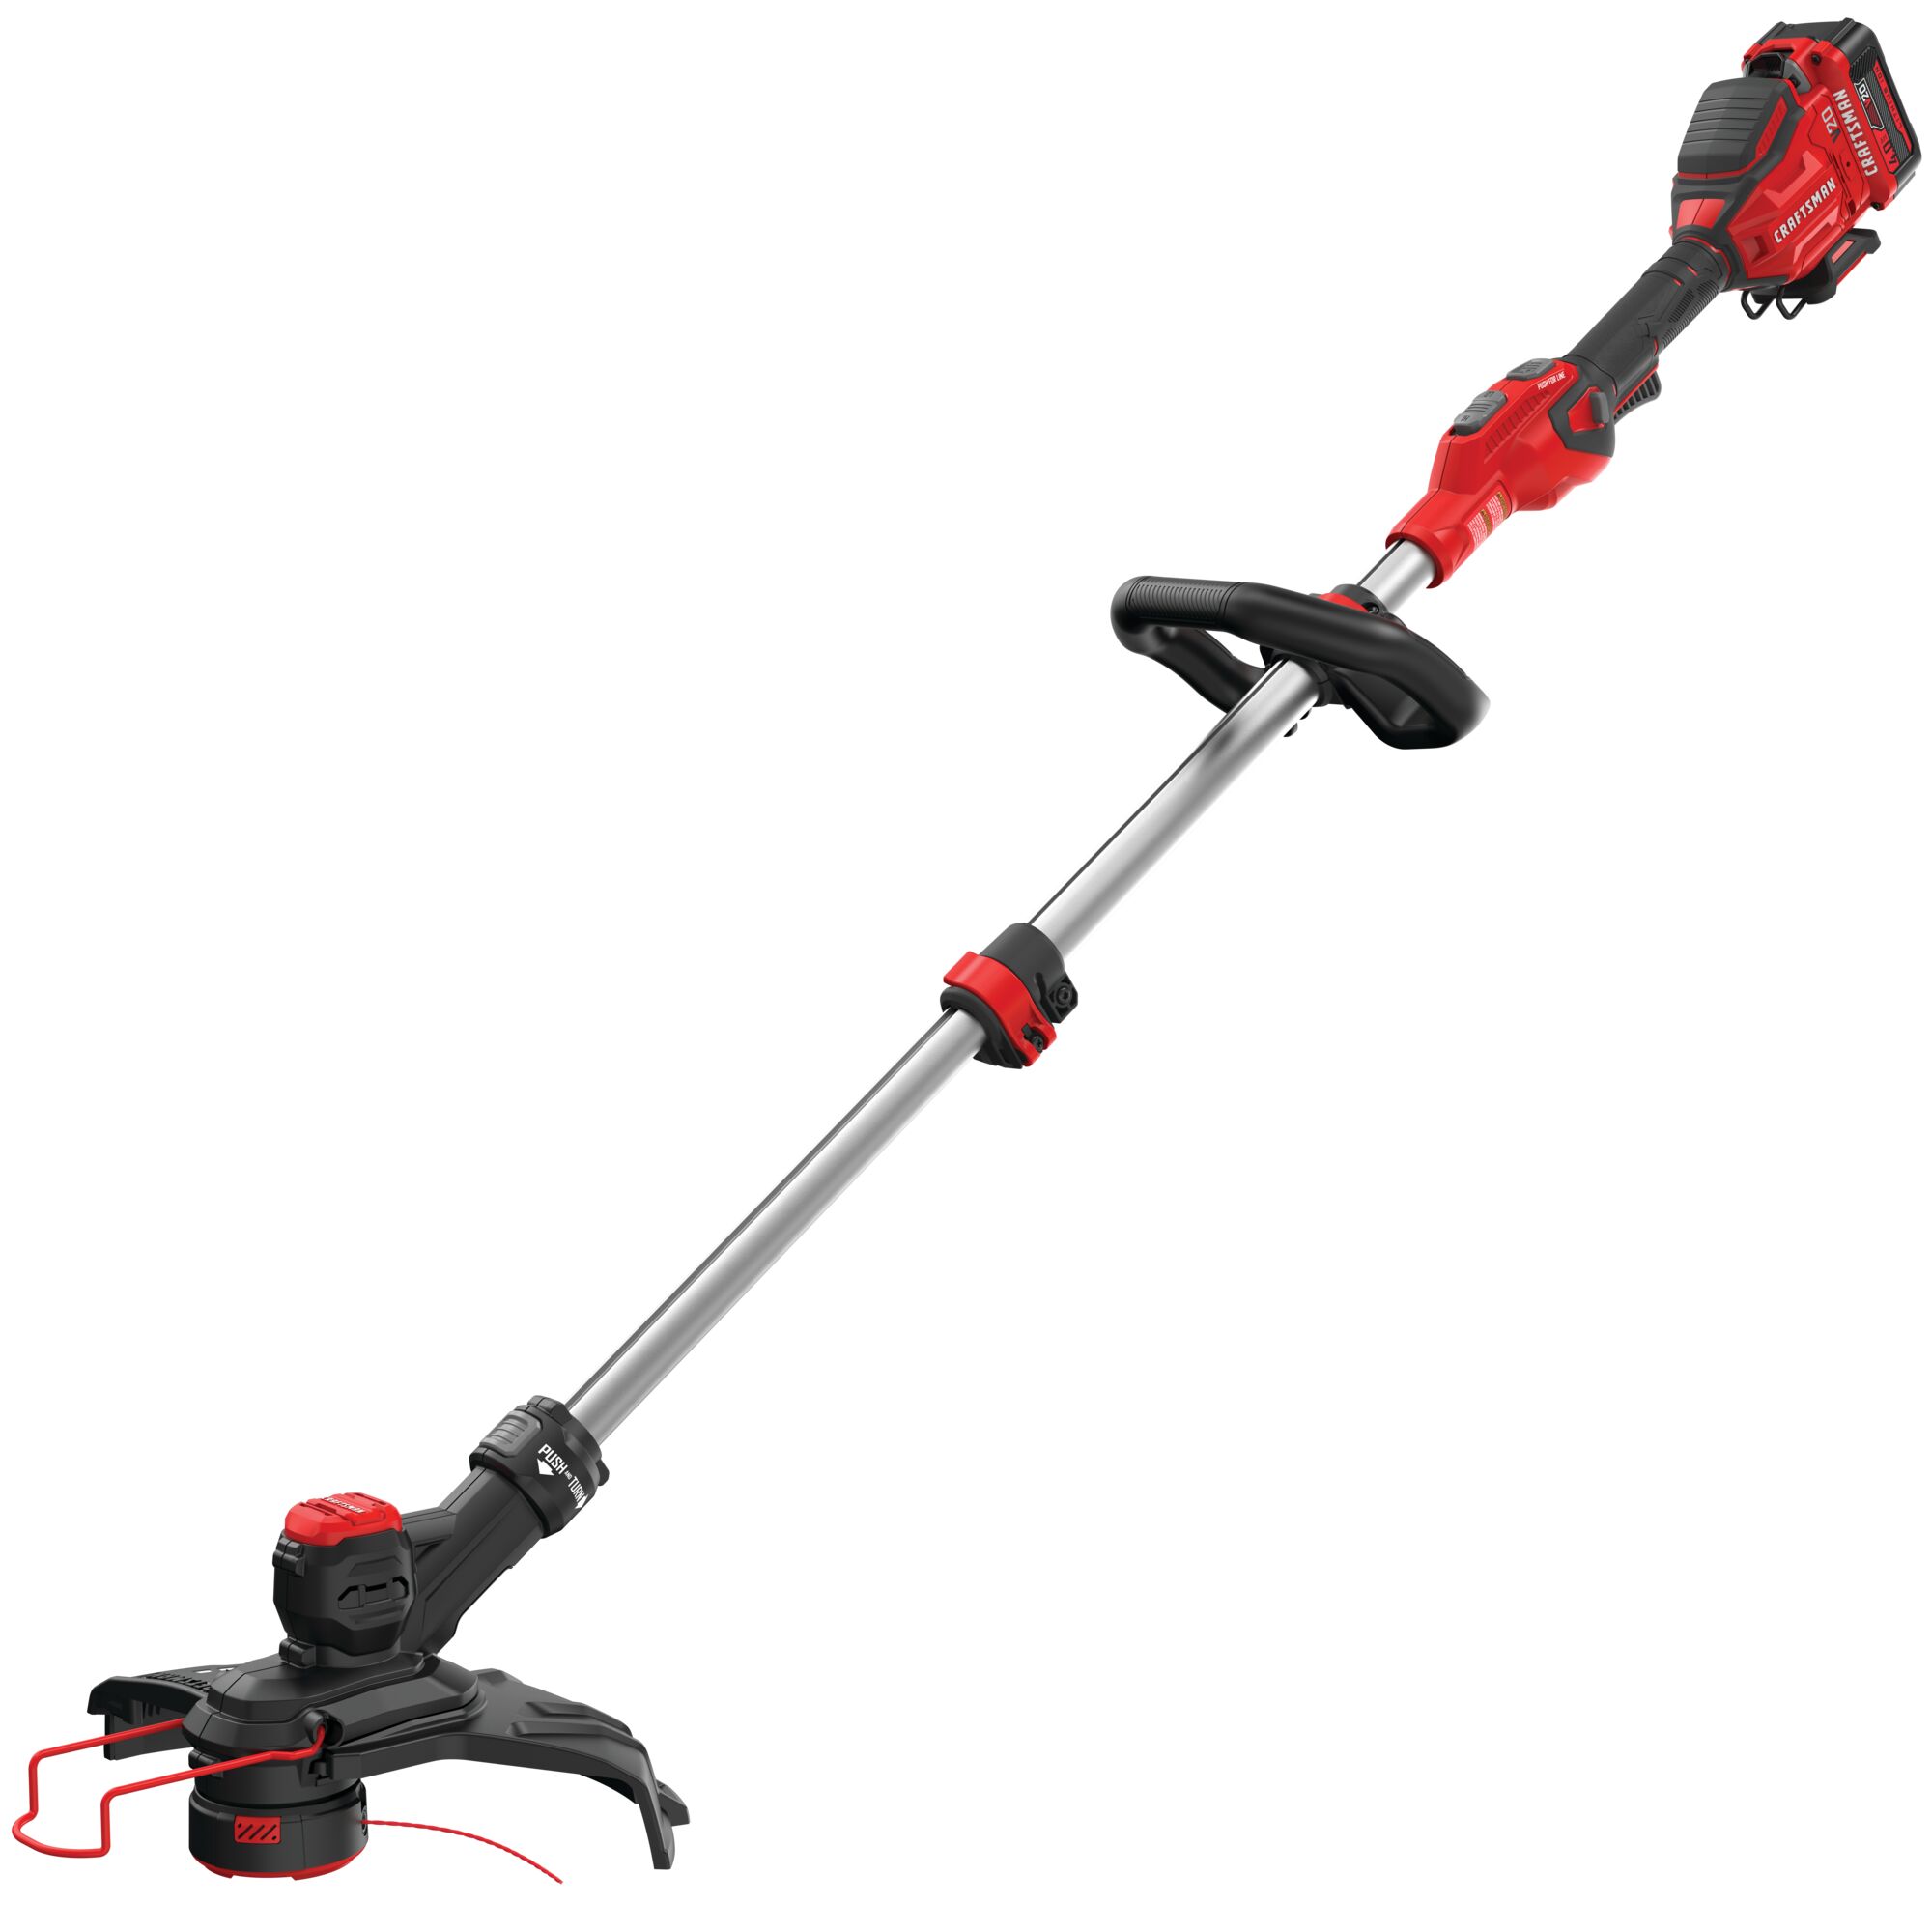 Left profile of 20 volt weedwacker 13 inch cordless string trimmer and edger with push button feed kit.